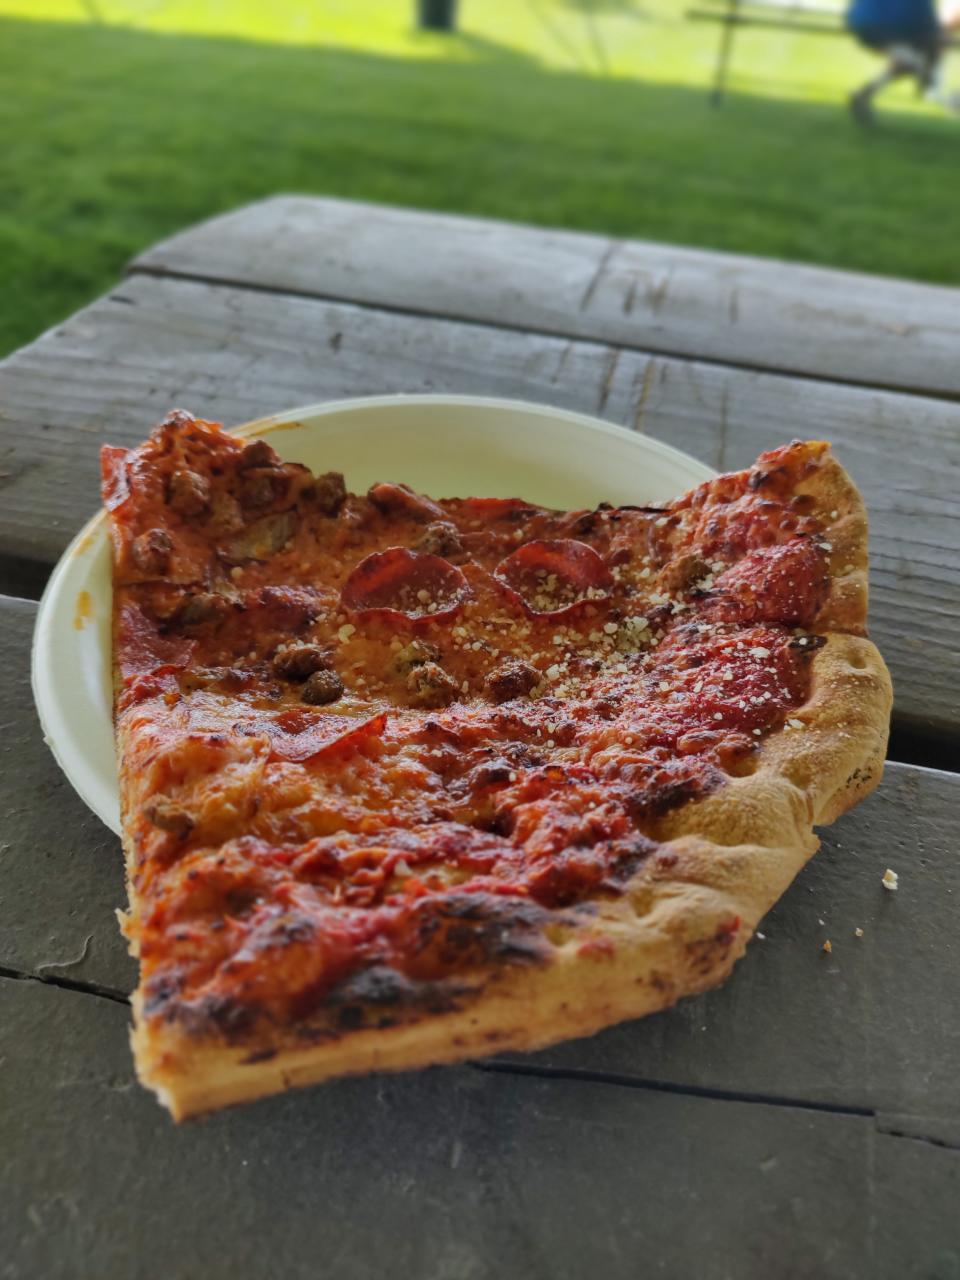 A slice of pizza from the outfit Spicy Pie at the Coachella Valley Music and Arts Festival.